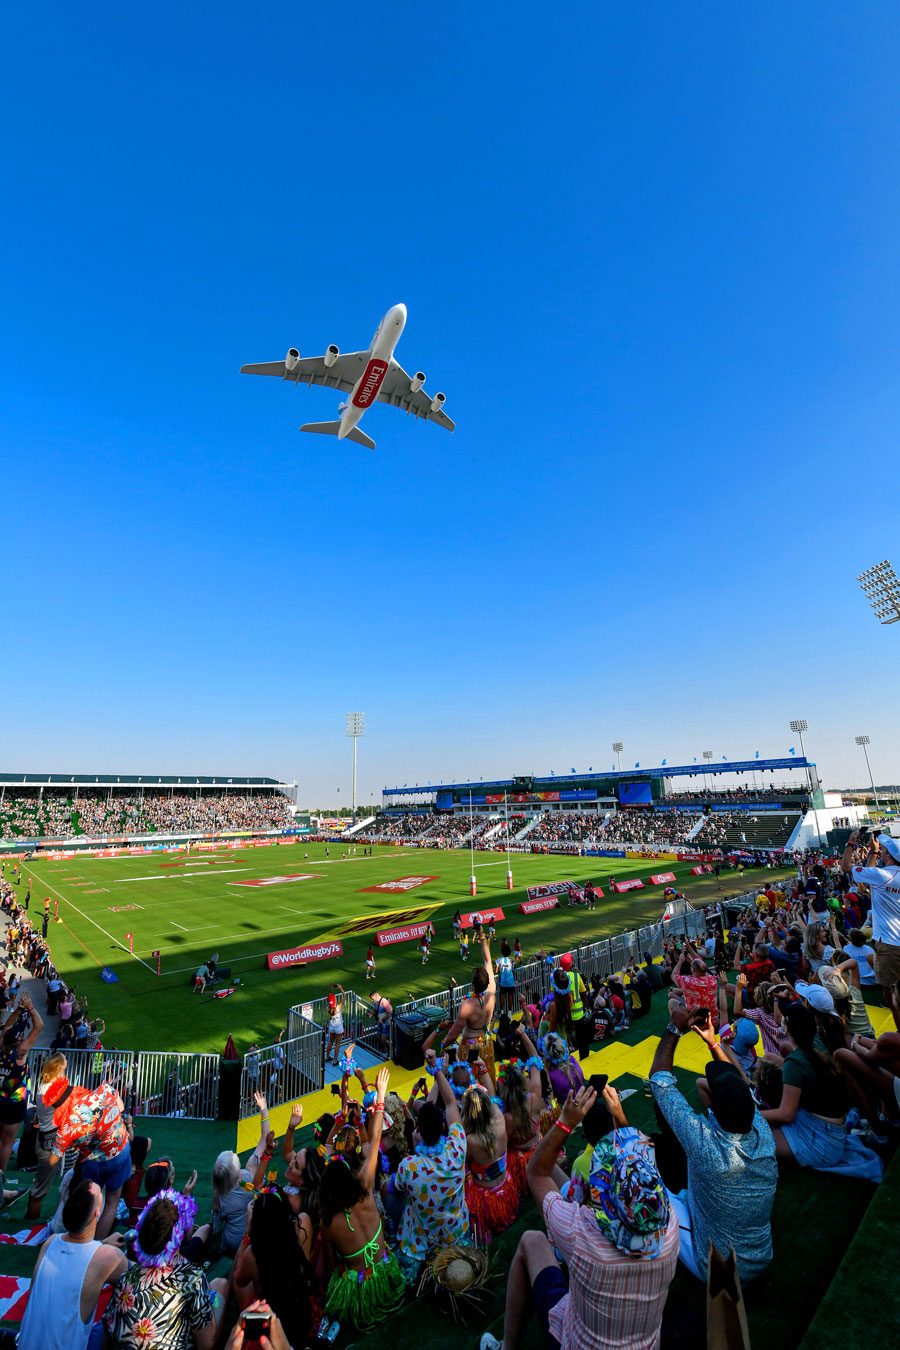 Emirates A380 soars over the Sevens Stadium with dazzling flypast to celebrate the UAEs 50th Jubilee